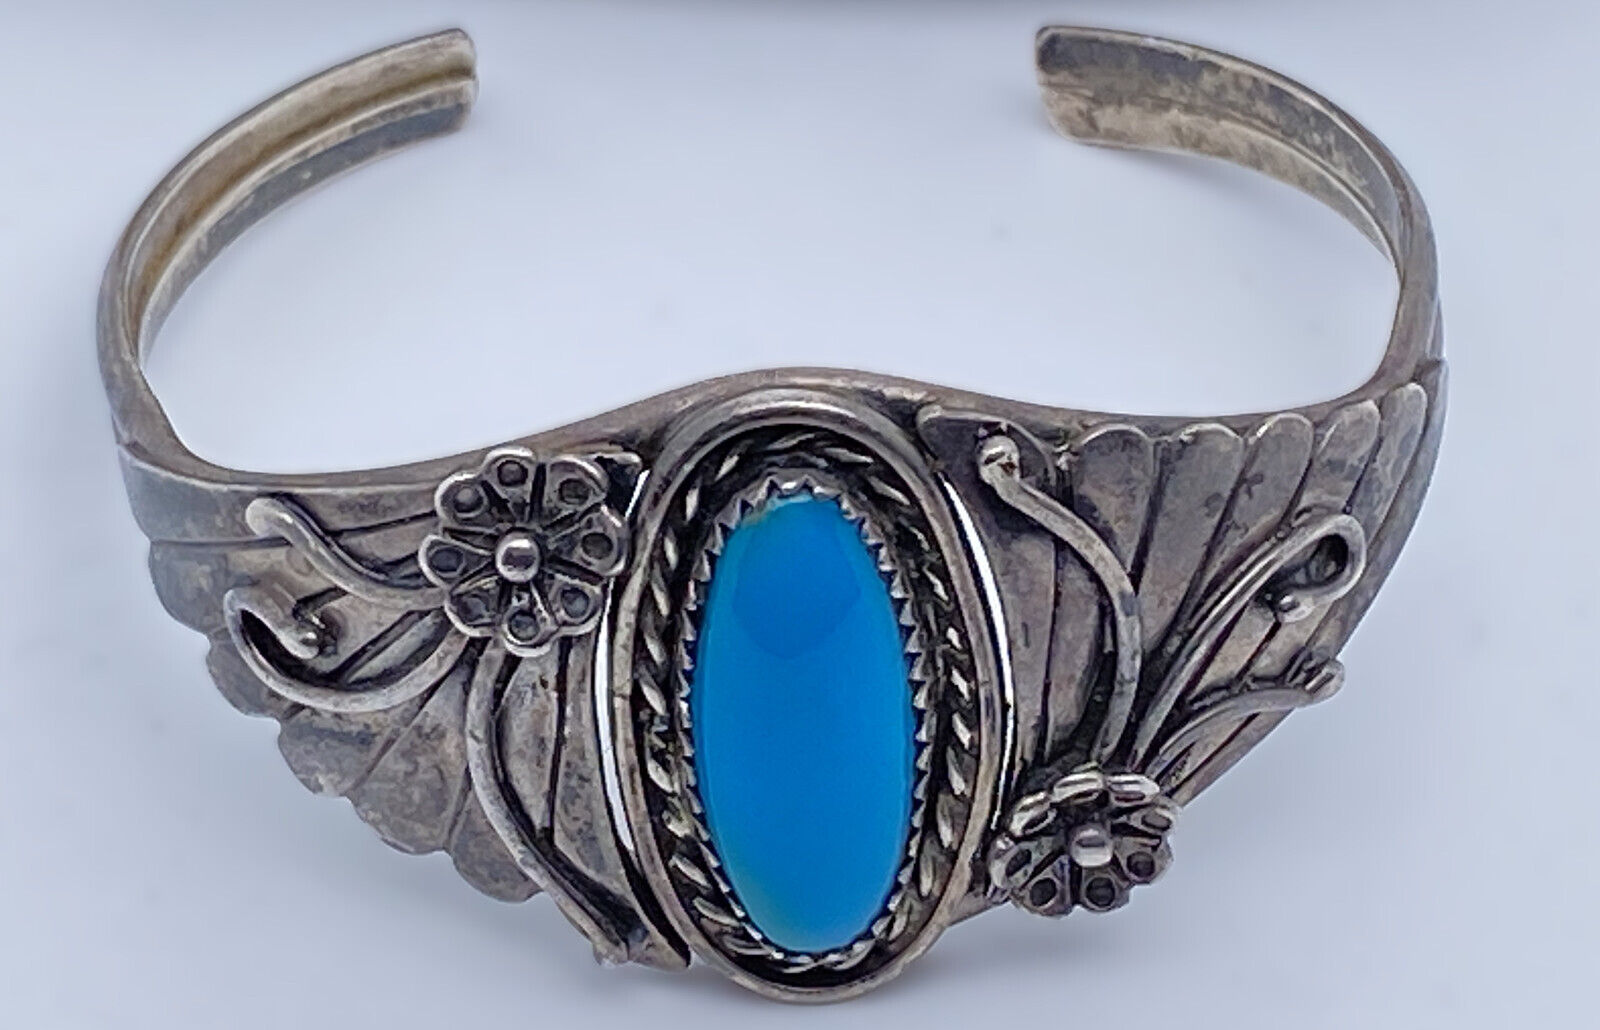 VTG Navajo Patricia “Pat” Platero Sterling Sleeping Beauty Turquoise Open Cuff